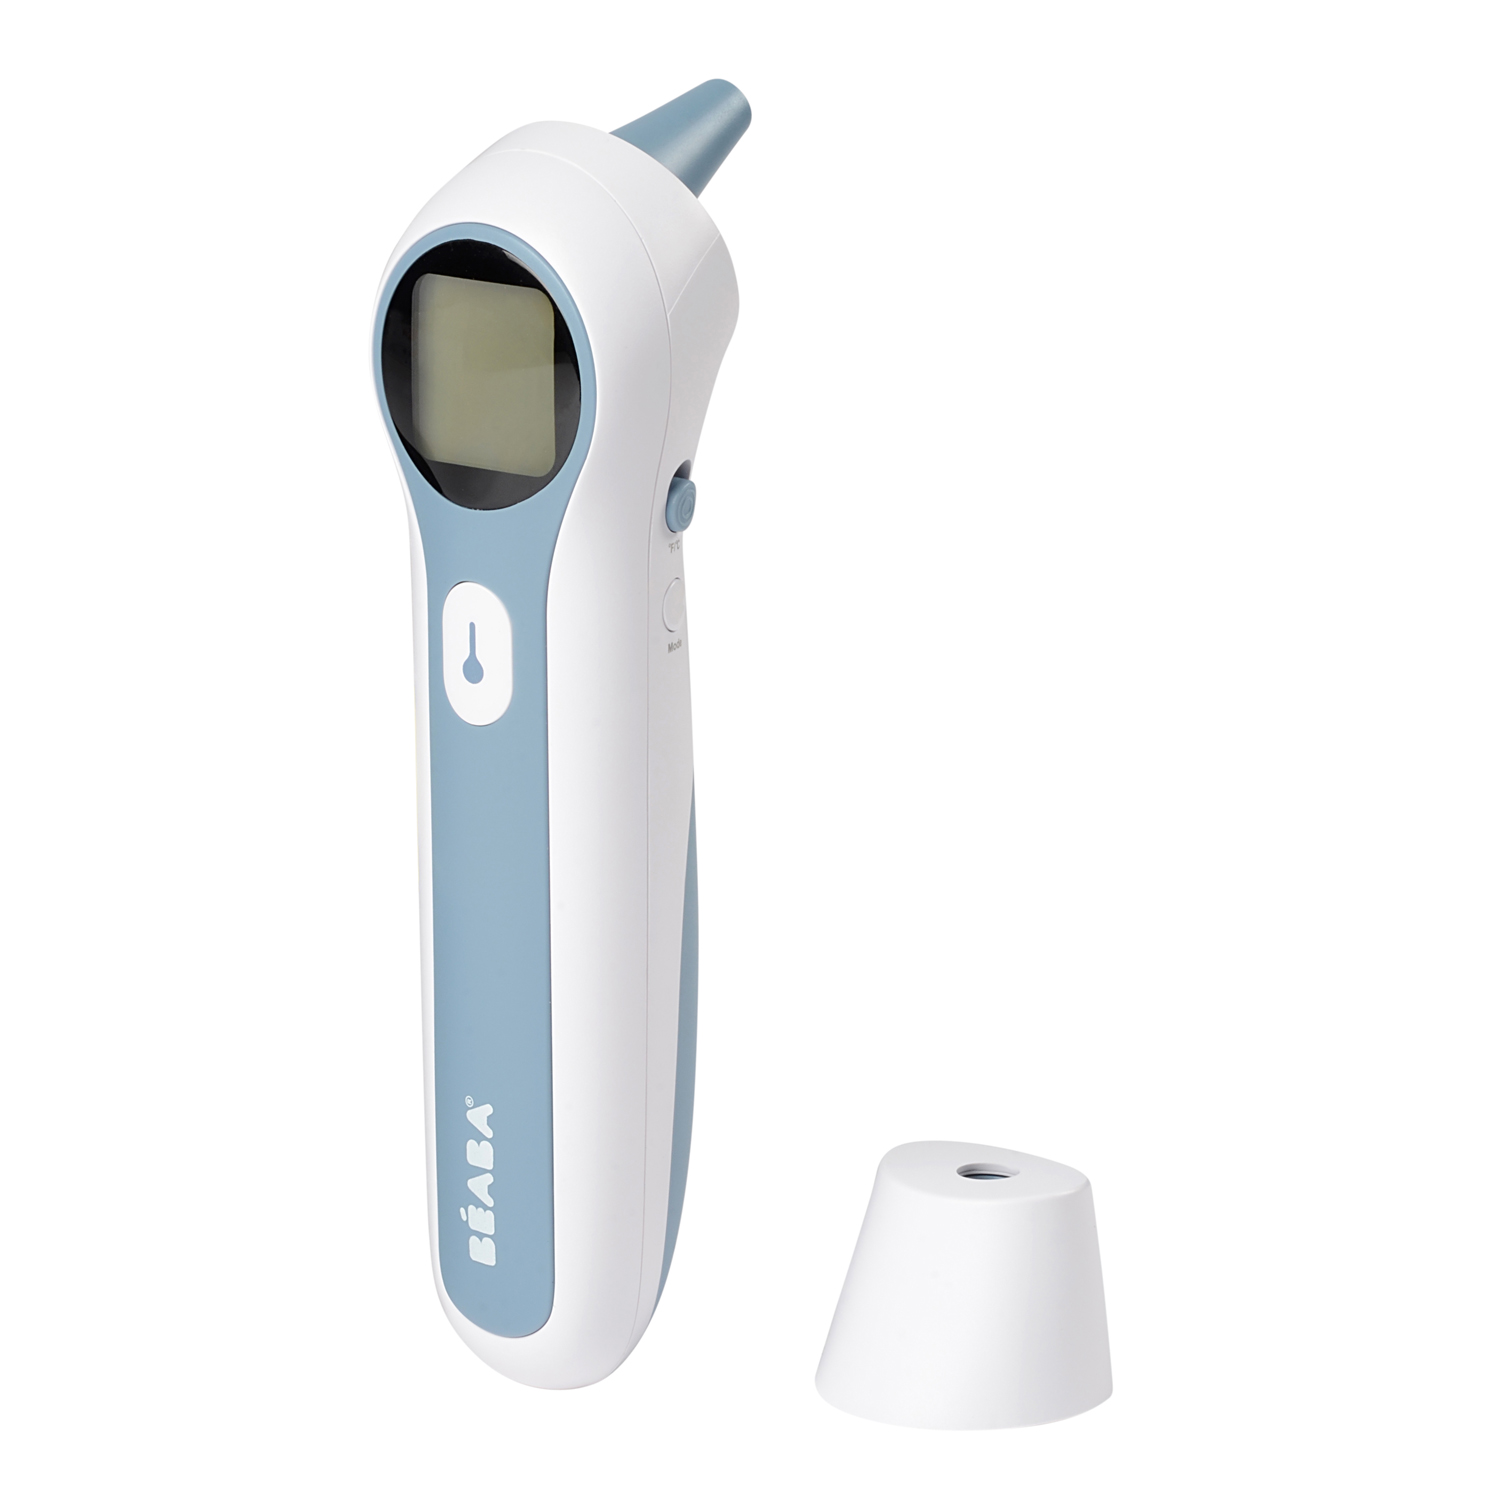 Beaba - Thermospeed - thermomètre infrarouge auriculaire et frontal BLANC Béaba